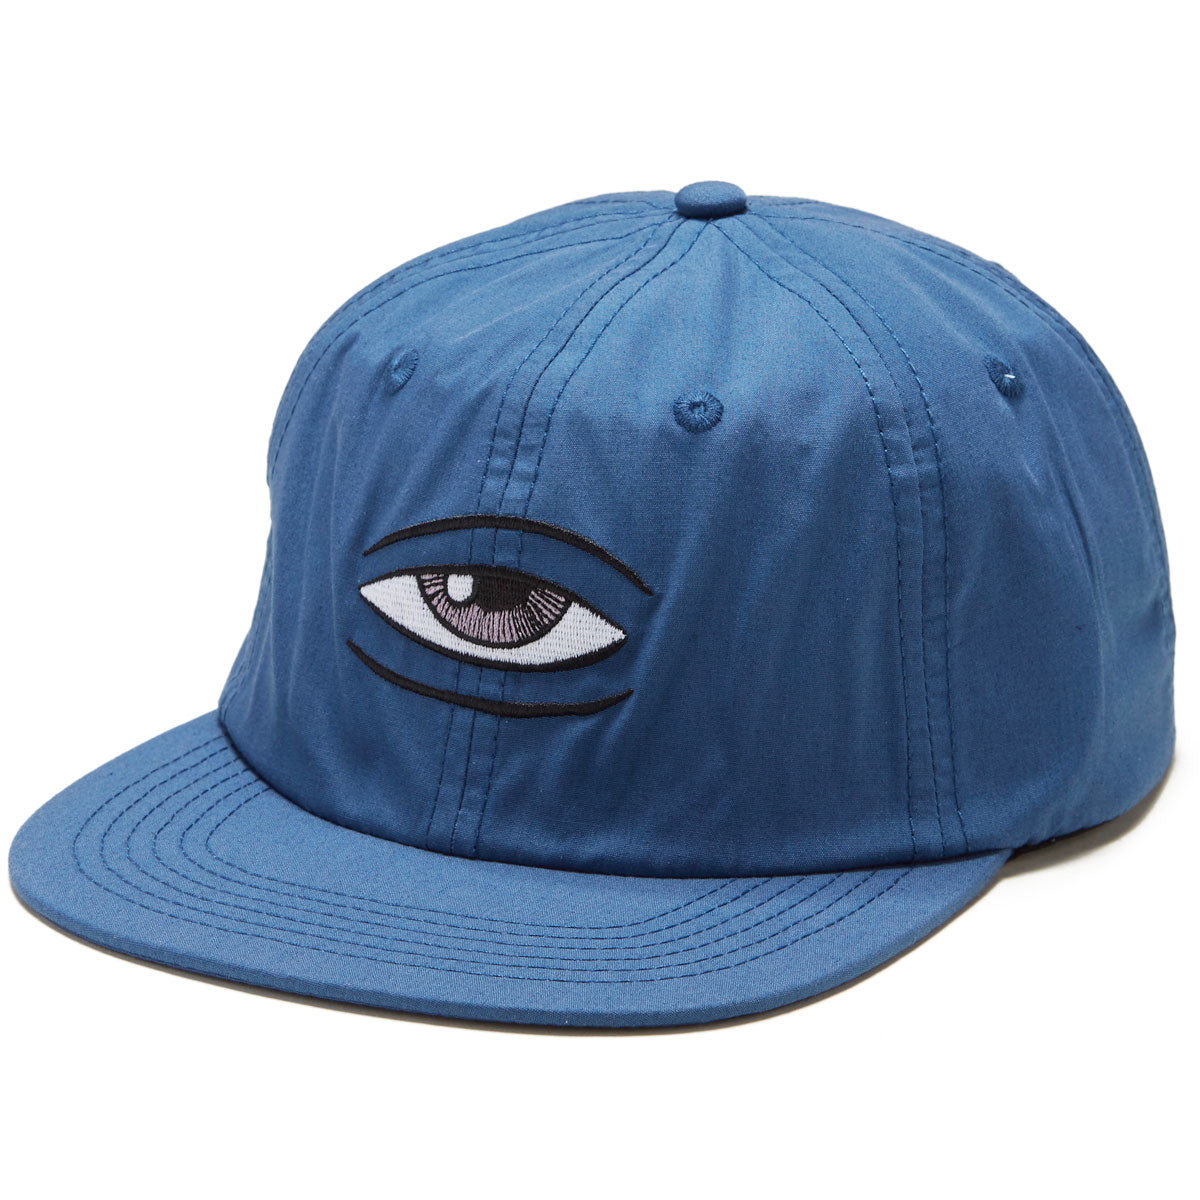 Toy Machine Sect Eye Unstructured Hat - Slate image 1